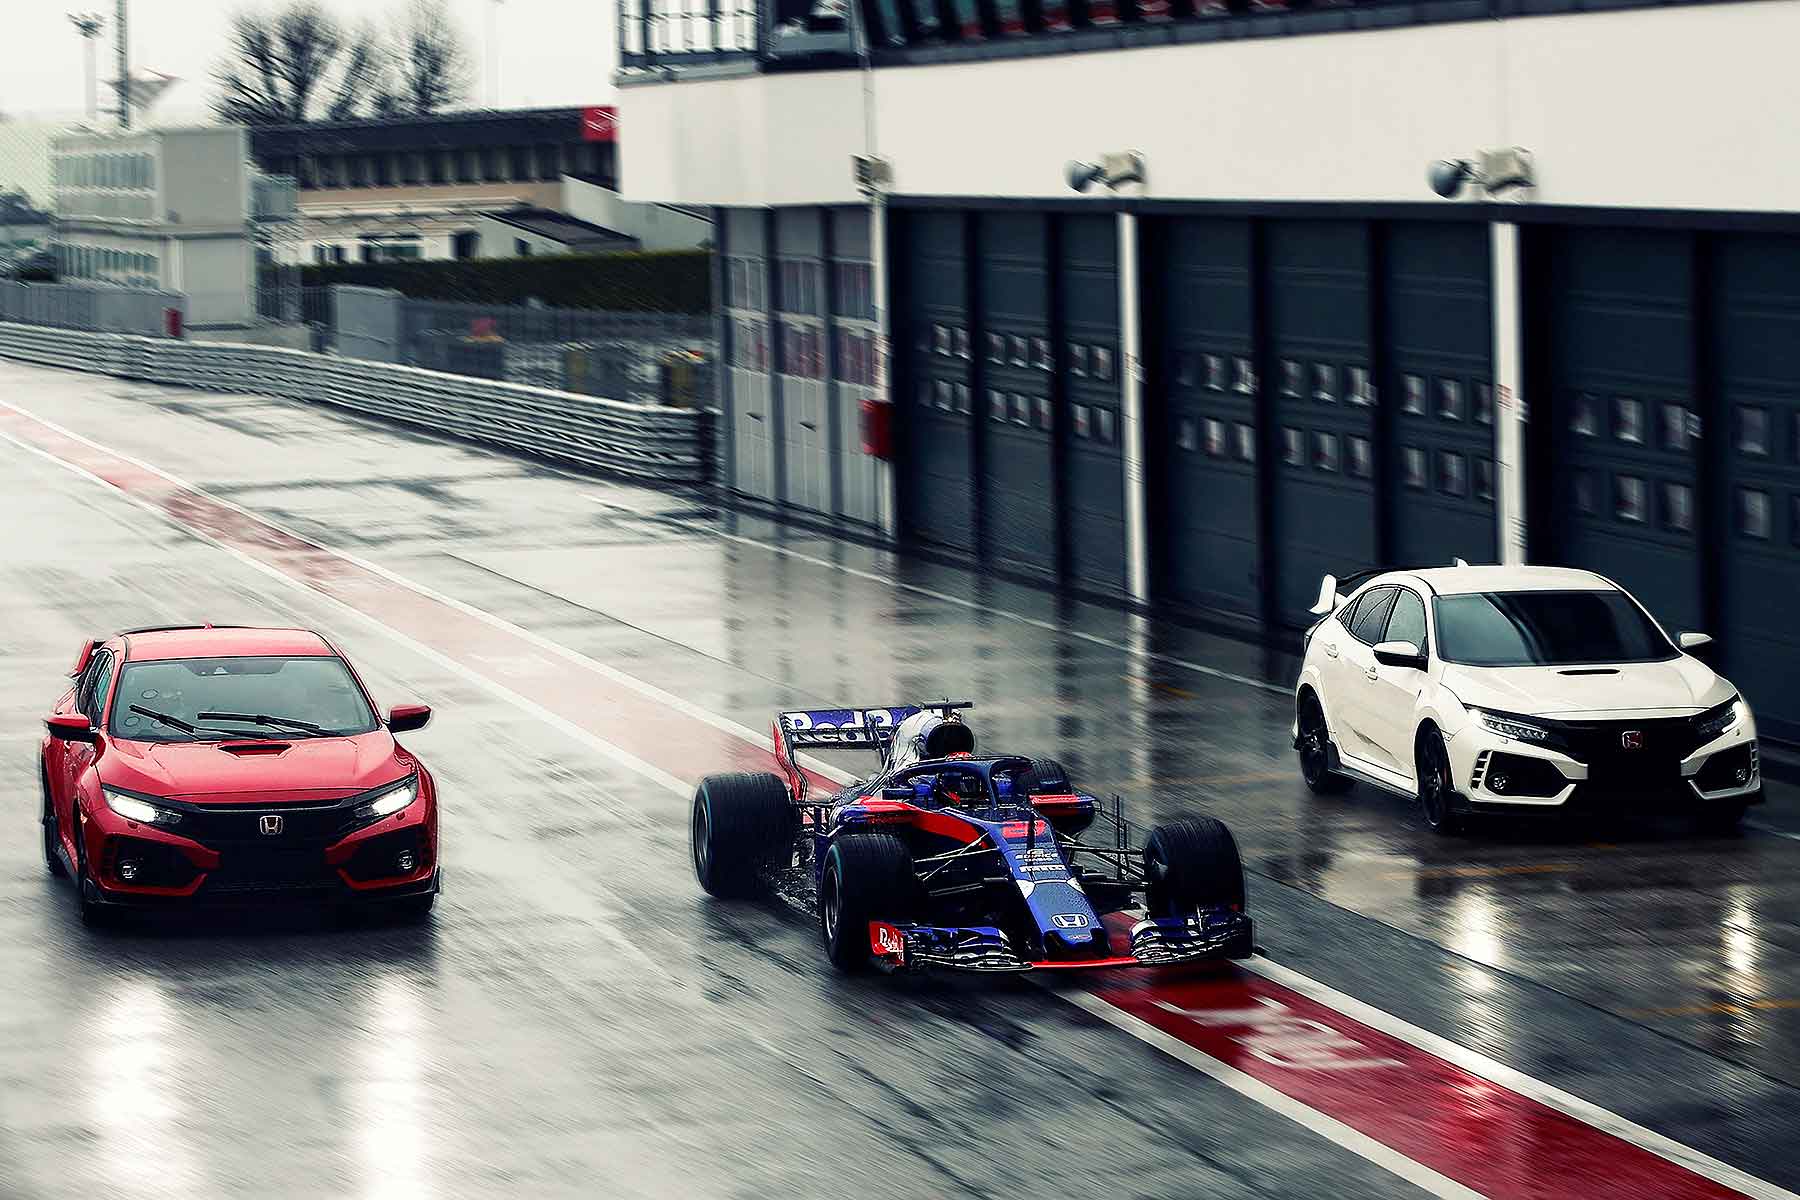 Honda Civic Type R is a Toro Rosso F1 driver's road car choice